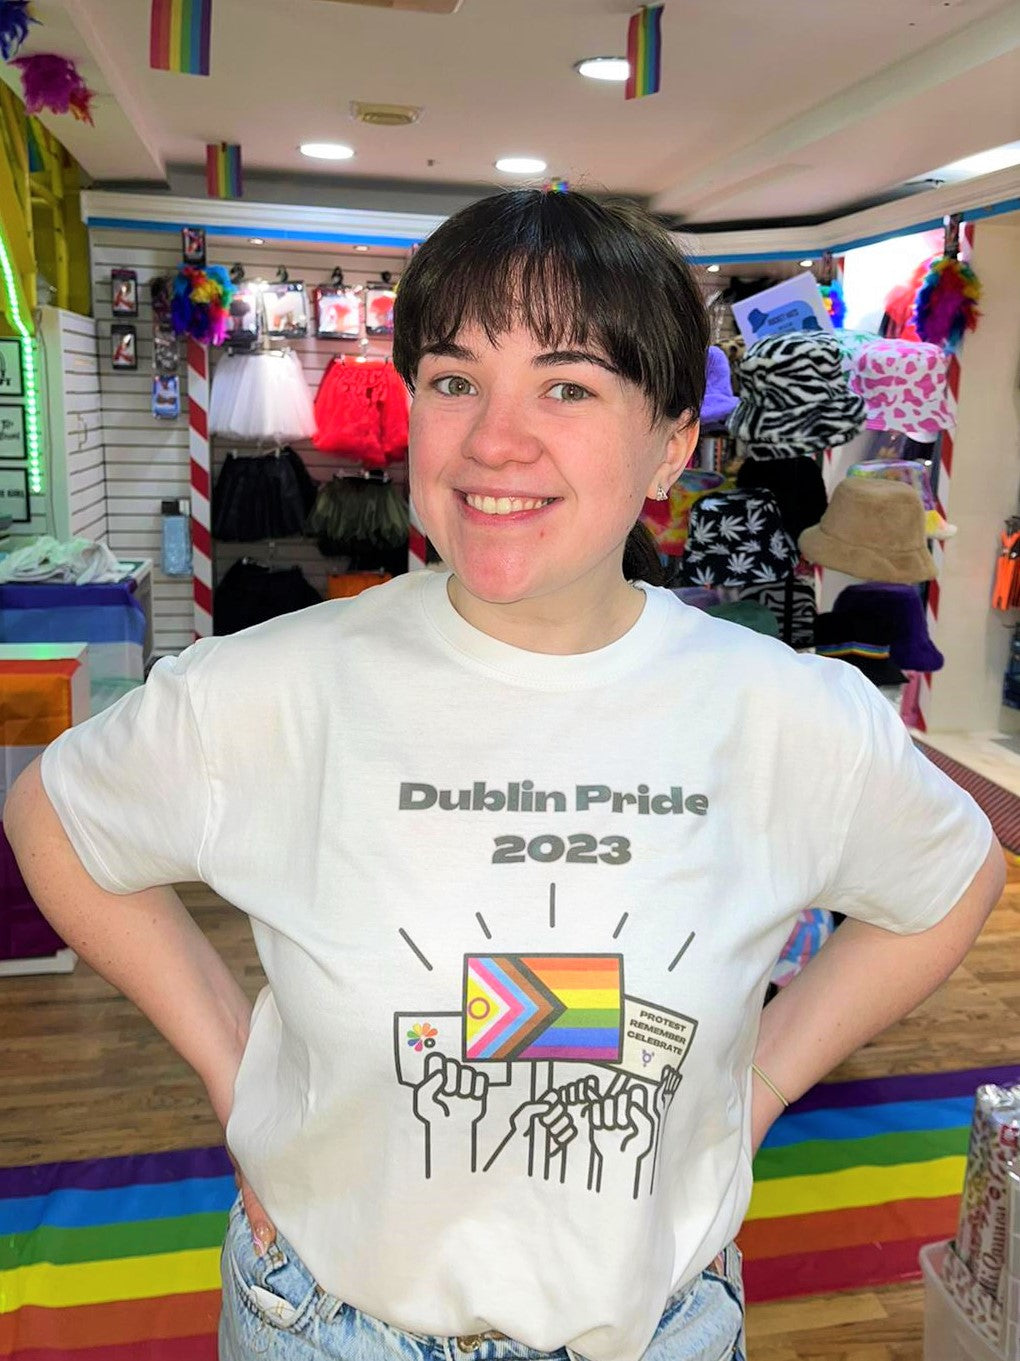 Pride Outhouse T-Shirt